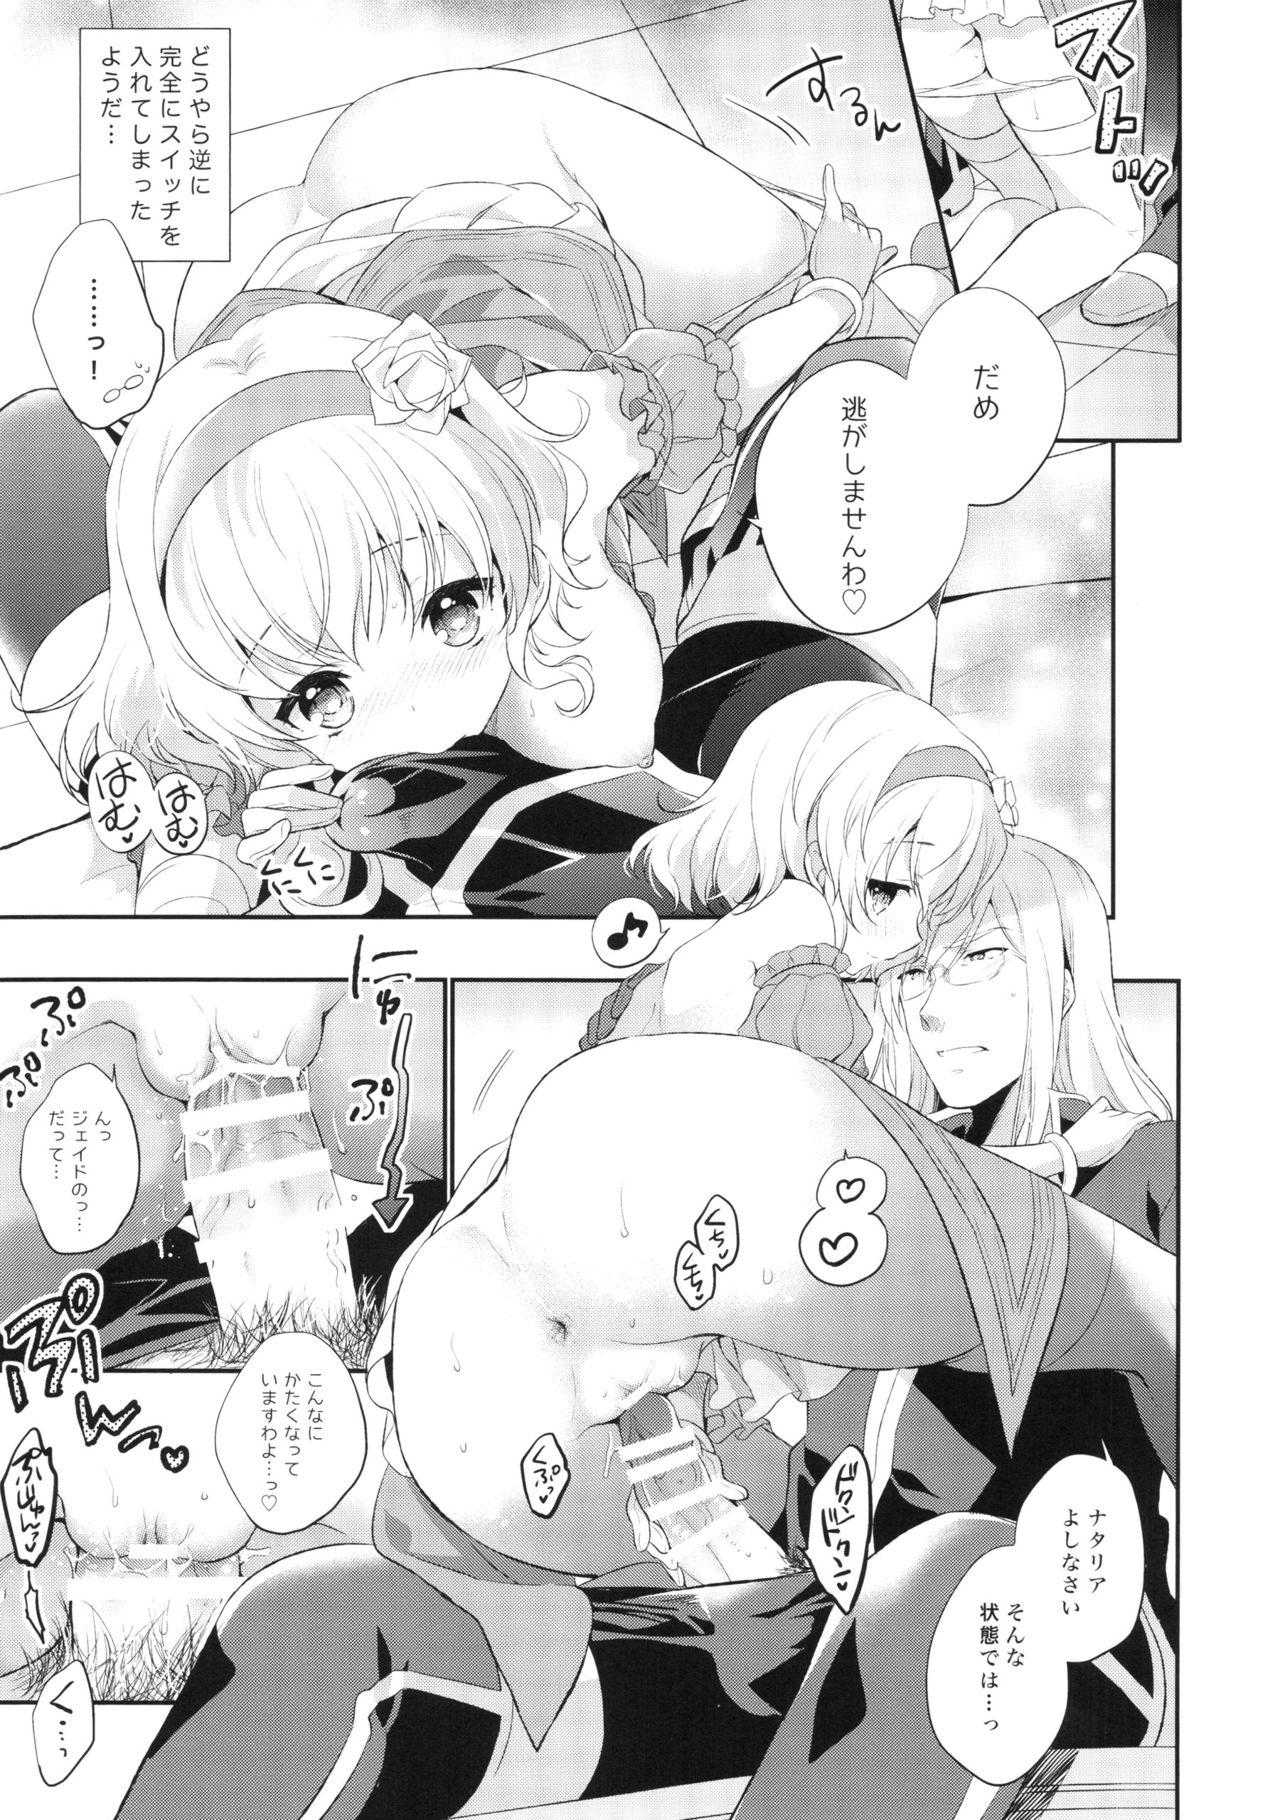 Pussyfucking Temptation Princess - Tales of the abyss Gay Boy Porn - Page 9